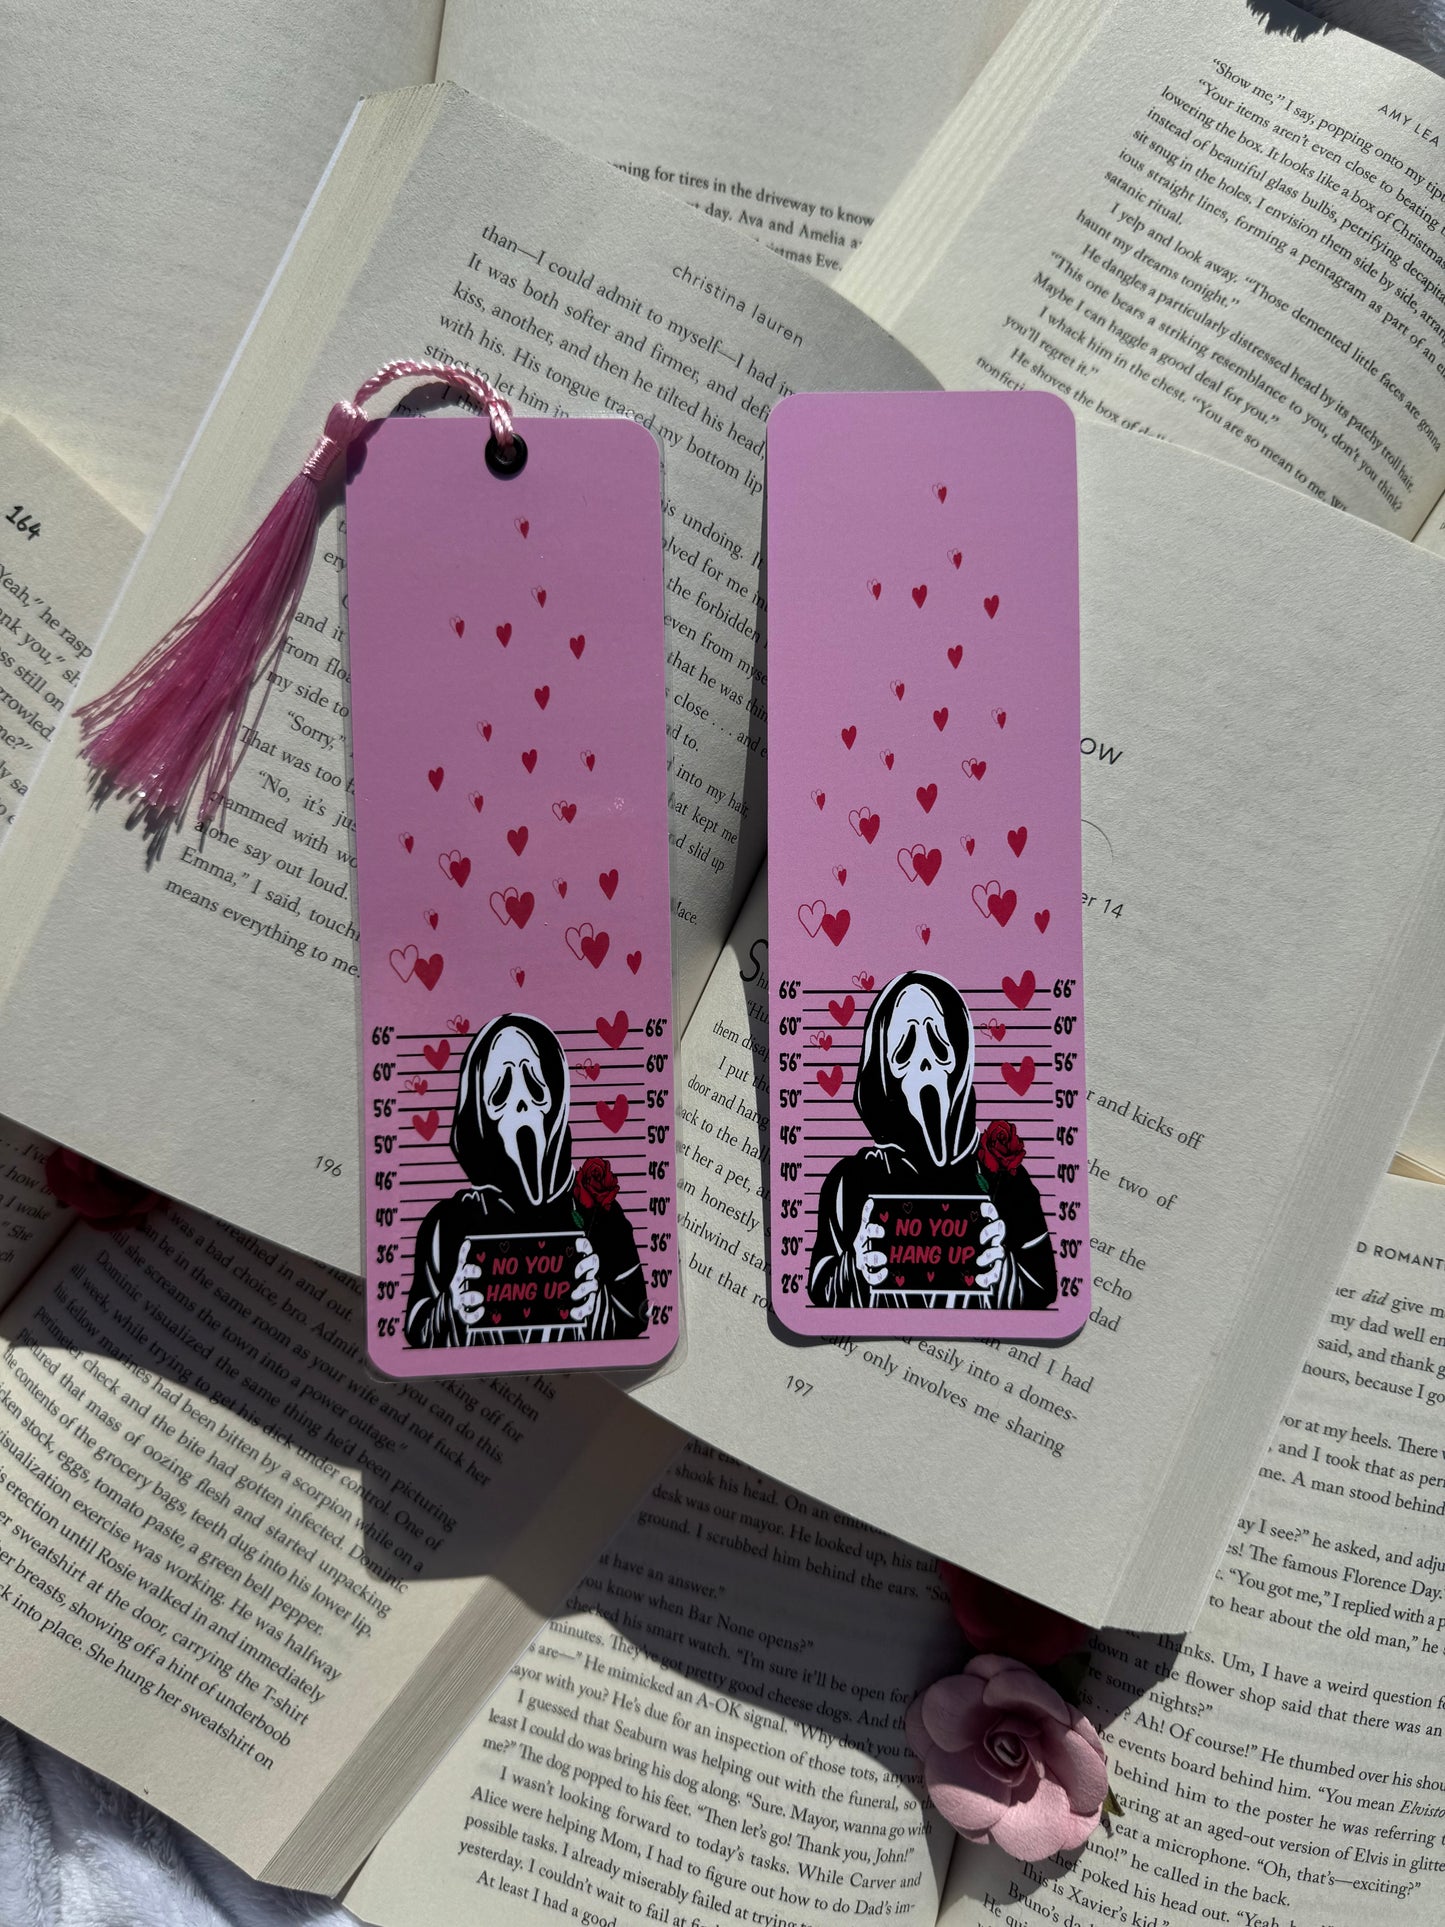 Stab much, Ghostface? Bookmark